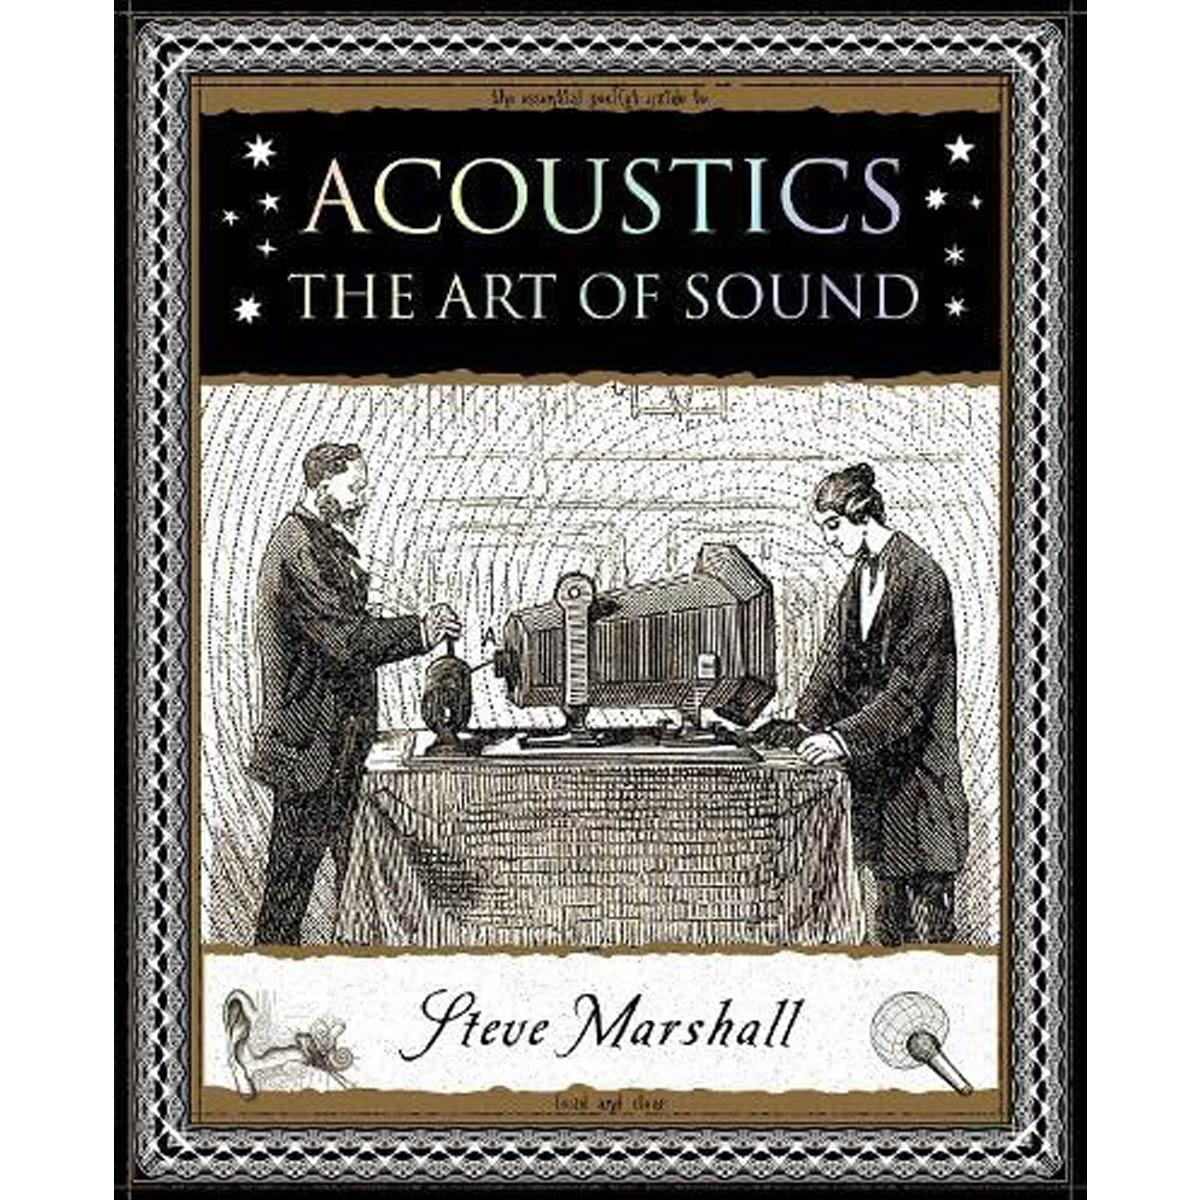 Acoustic The Art of Sound by Steve Marshall